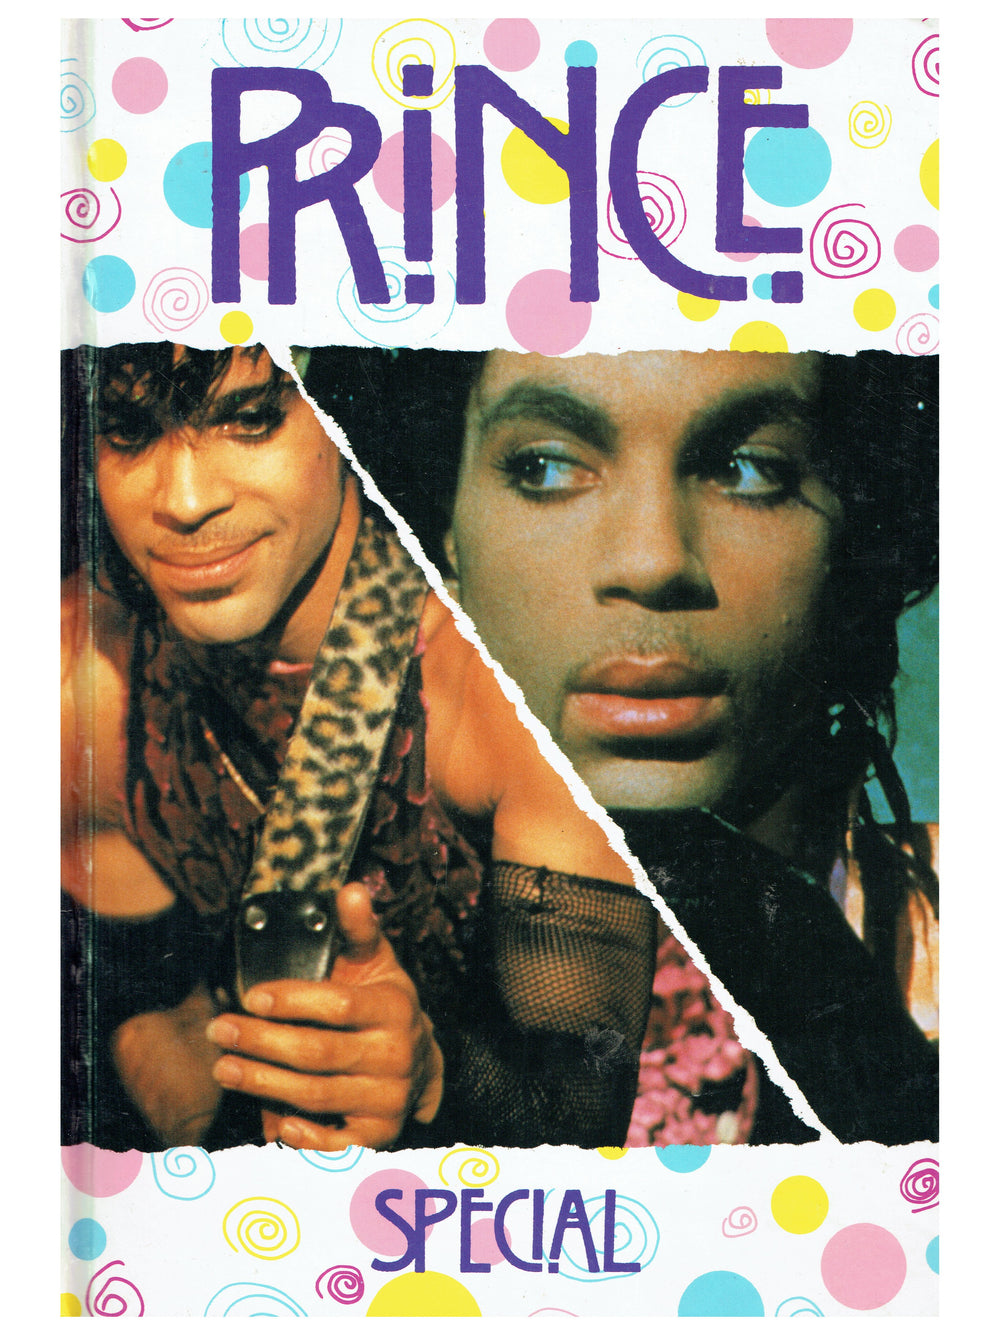 Prince – Special Hardback Book 45 Pages Published 1993 Full Colour